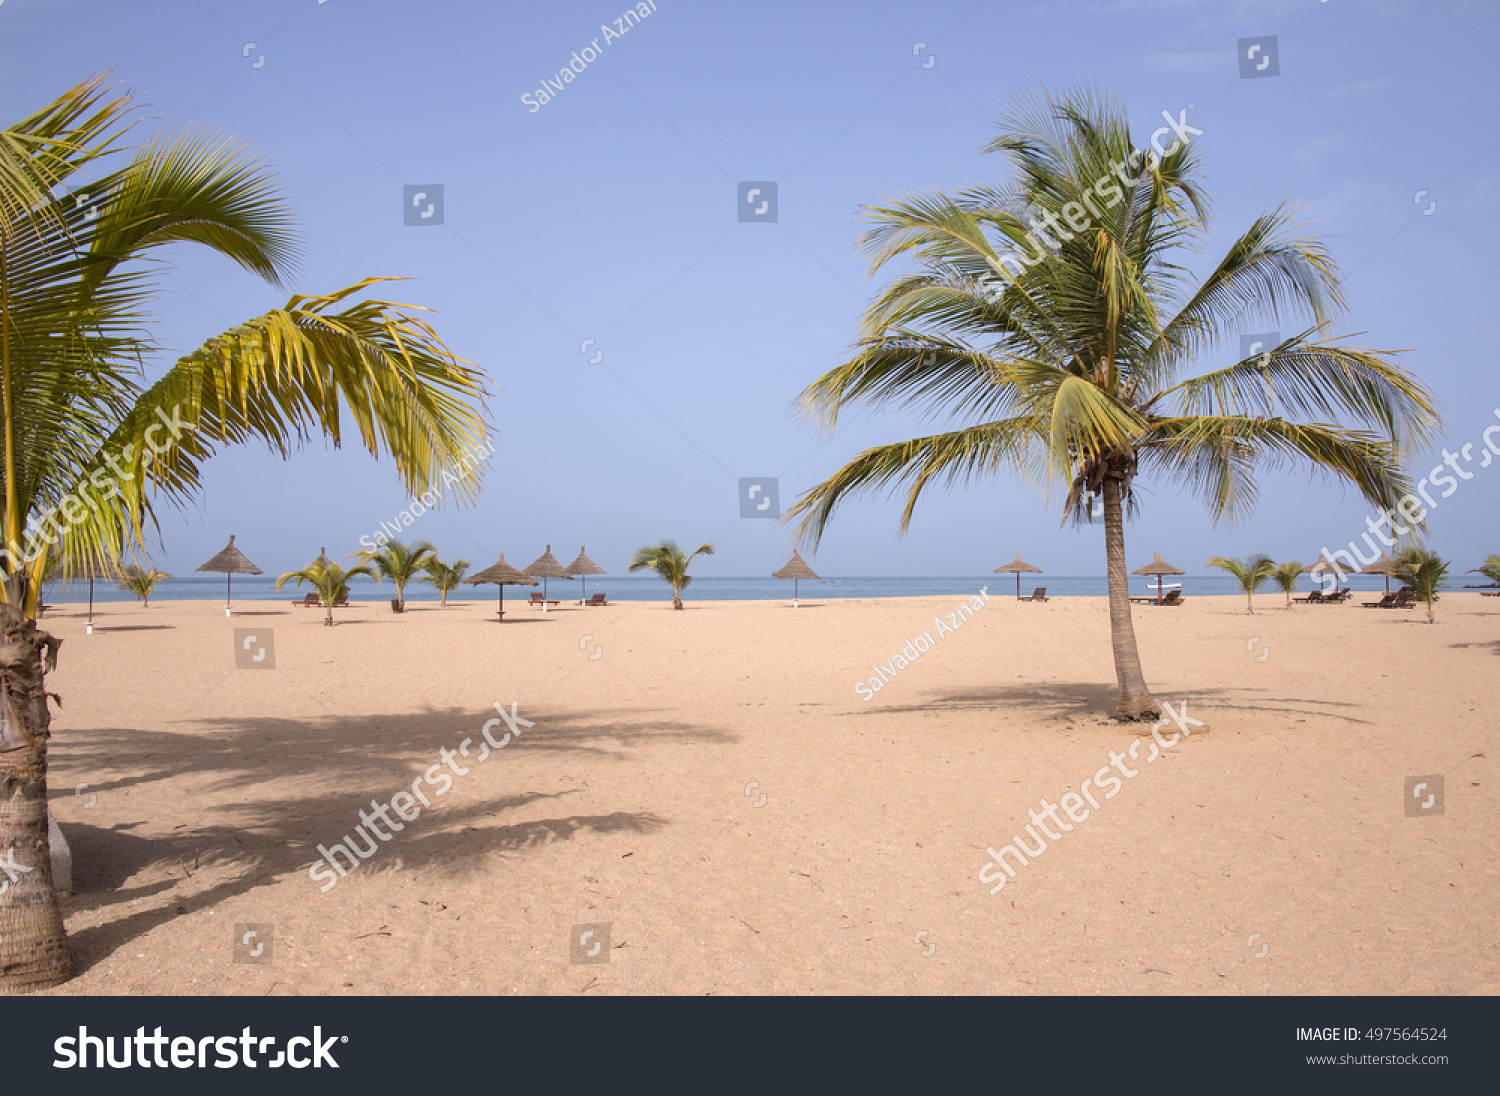 Palm trees on one of the beaches of Saly, in the coastal region of Mbour, Senegal #497564524